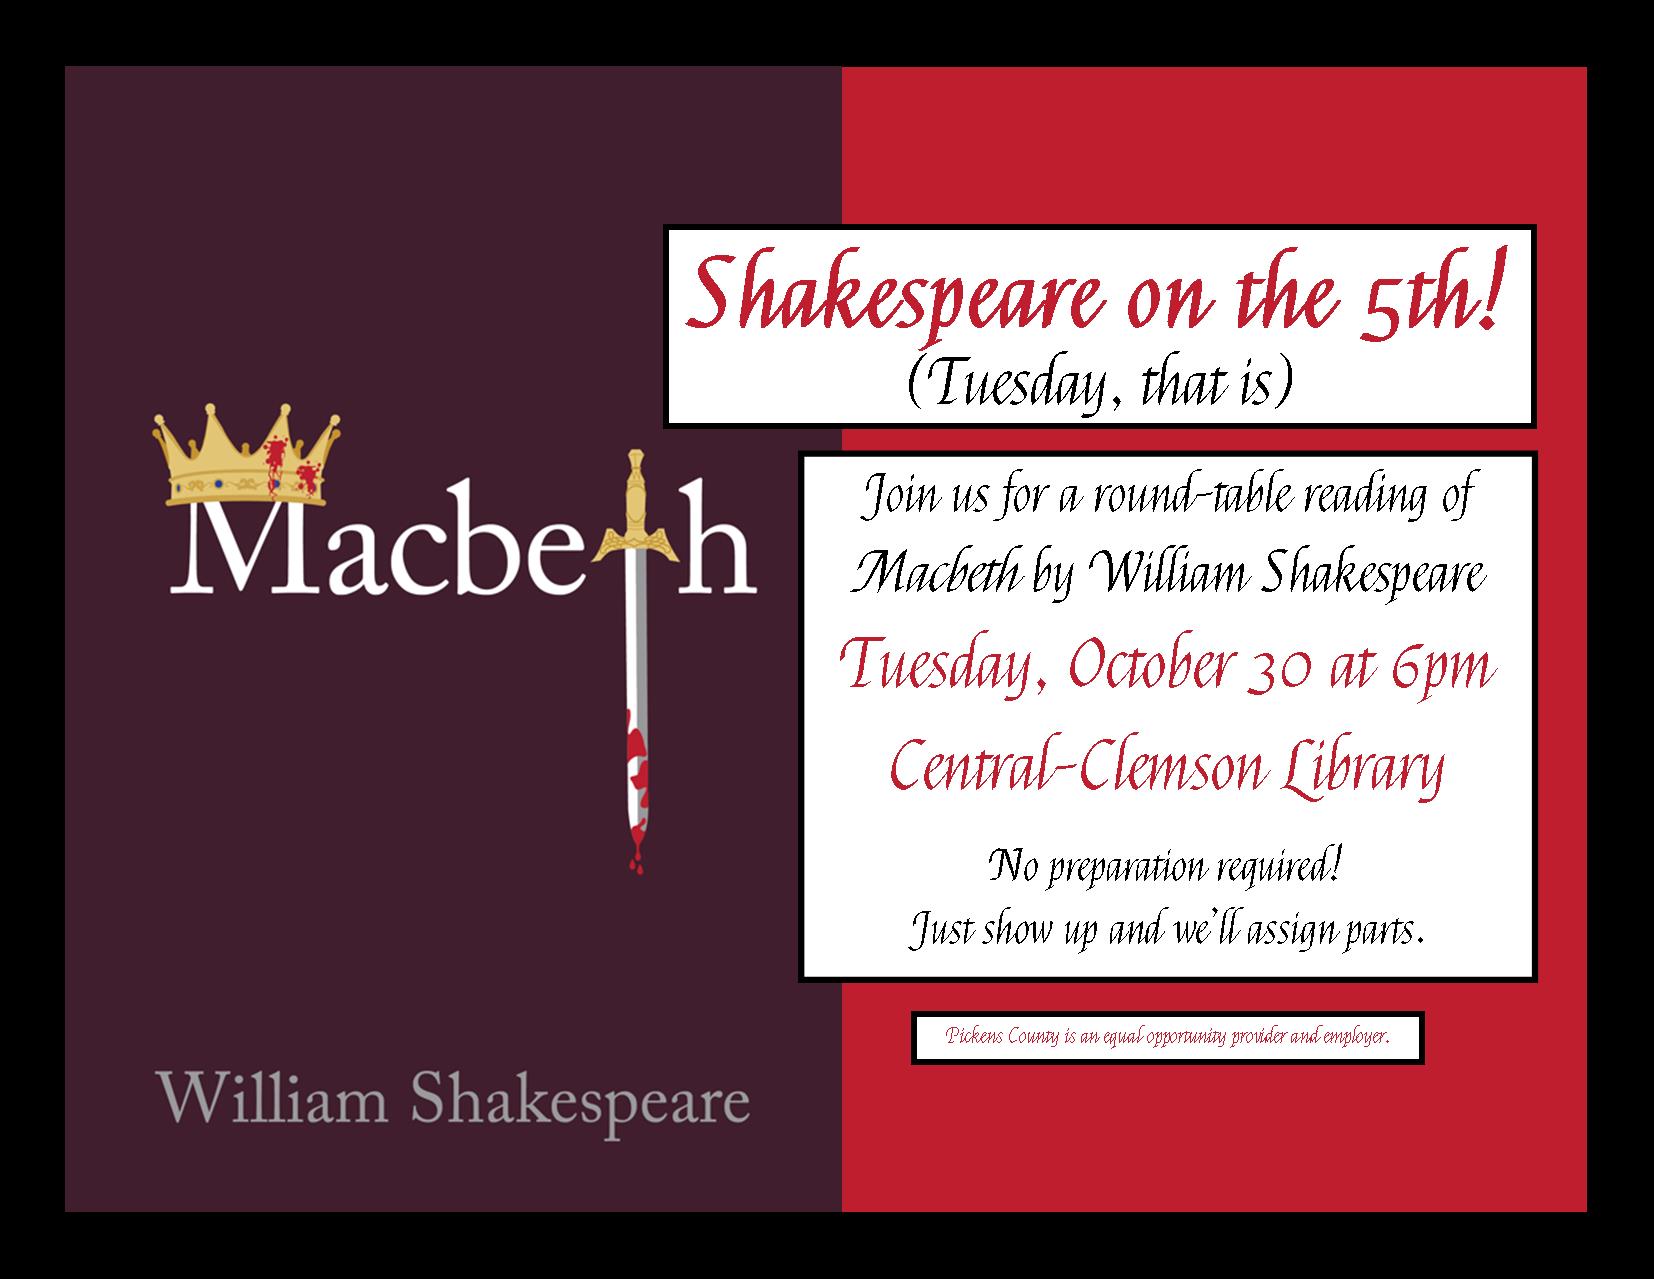 Macbeth Round Table Reading October 30th at 6pm at Central-Clemson Library